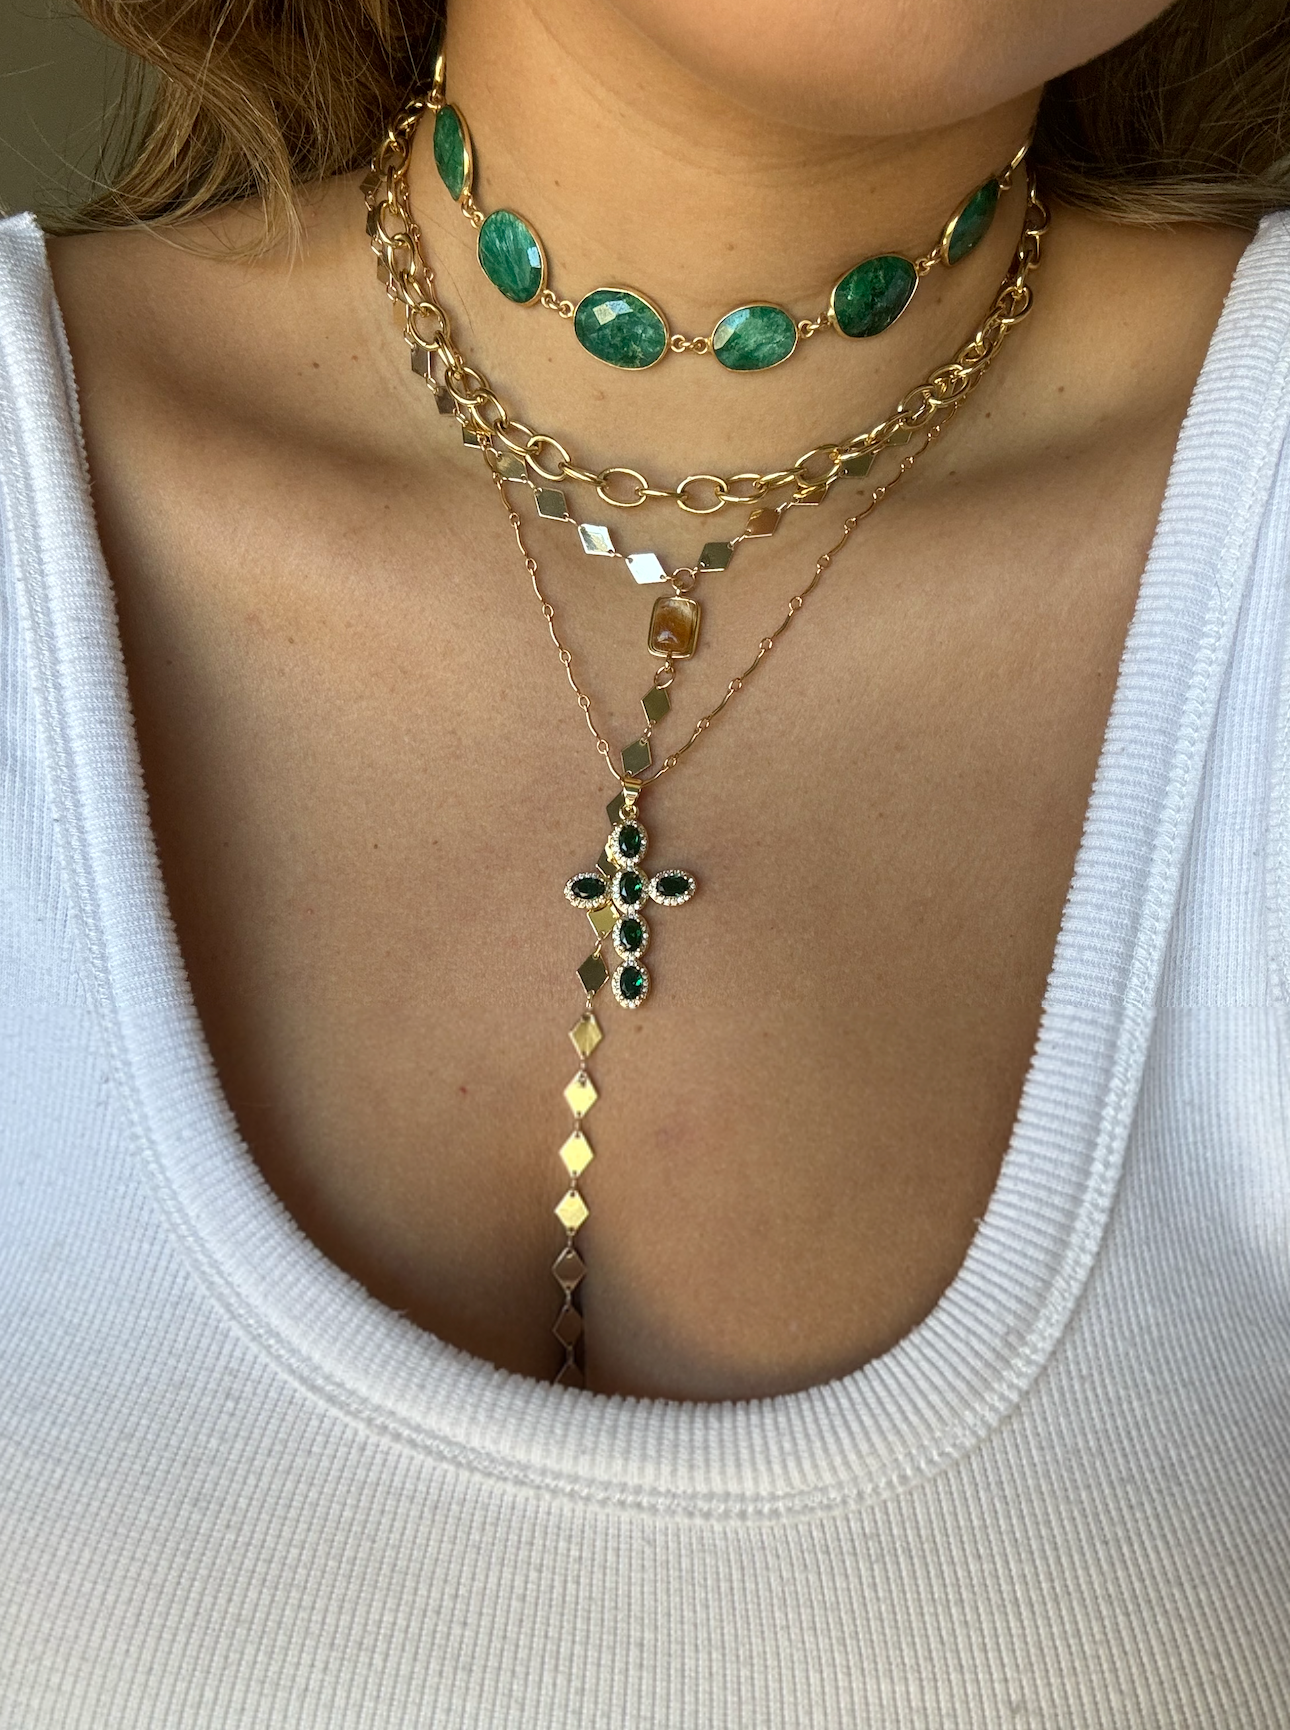 The Emerald Cross Necklace